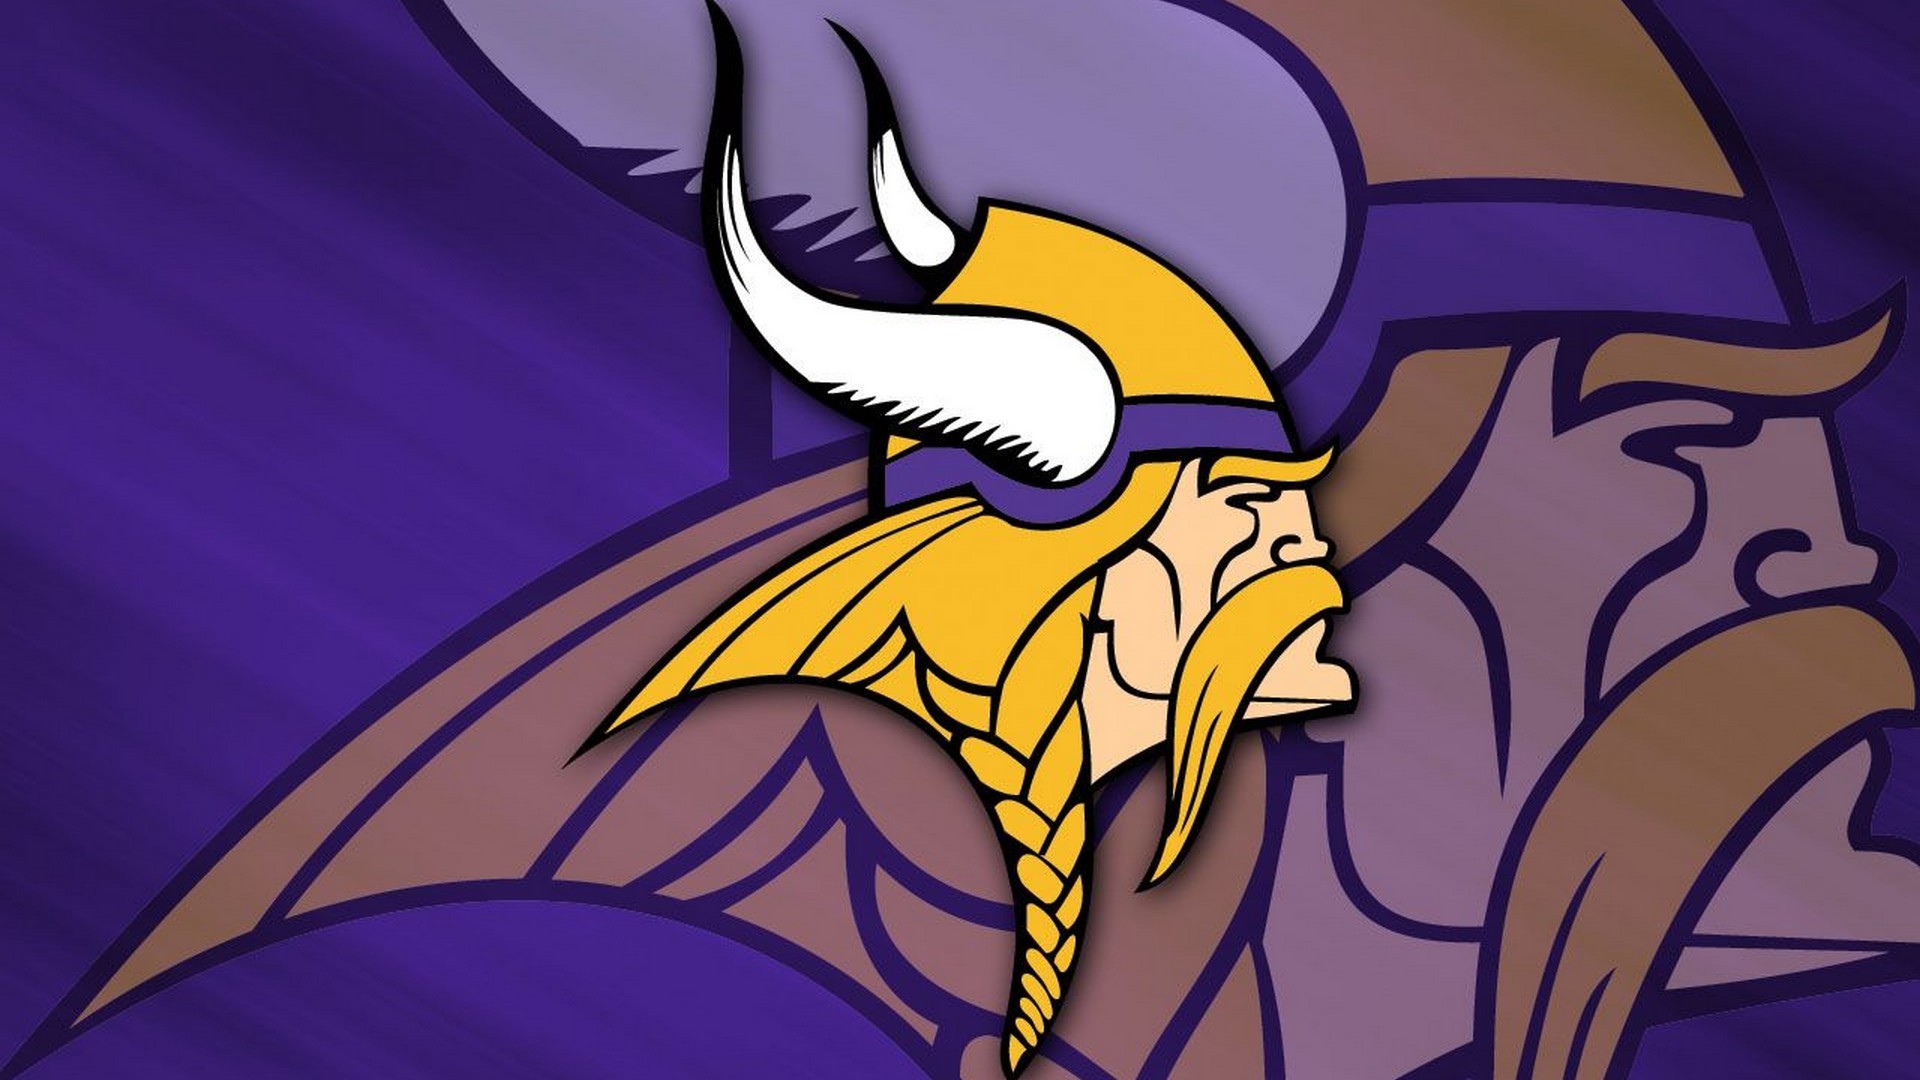 1920x1080 Backgrounds Minnesota Vikings HD with resolution  pixel. You can  make this wallpaper for your